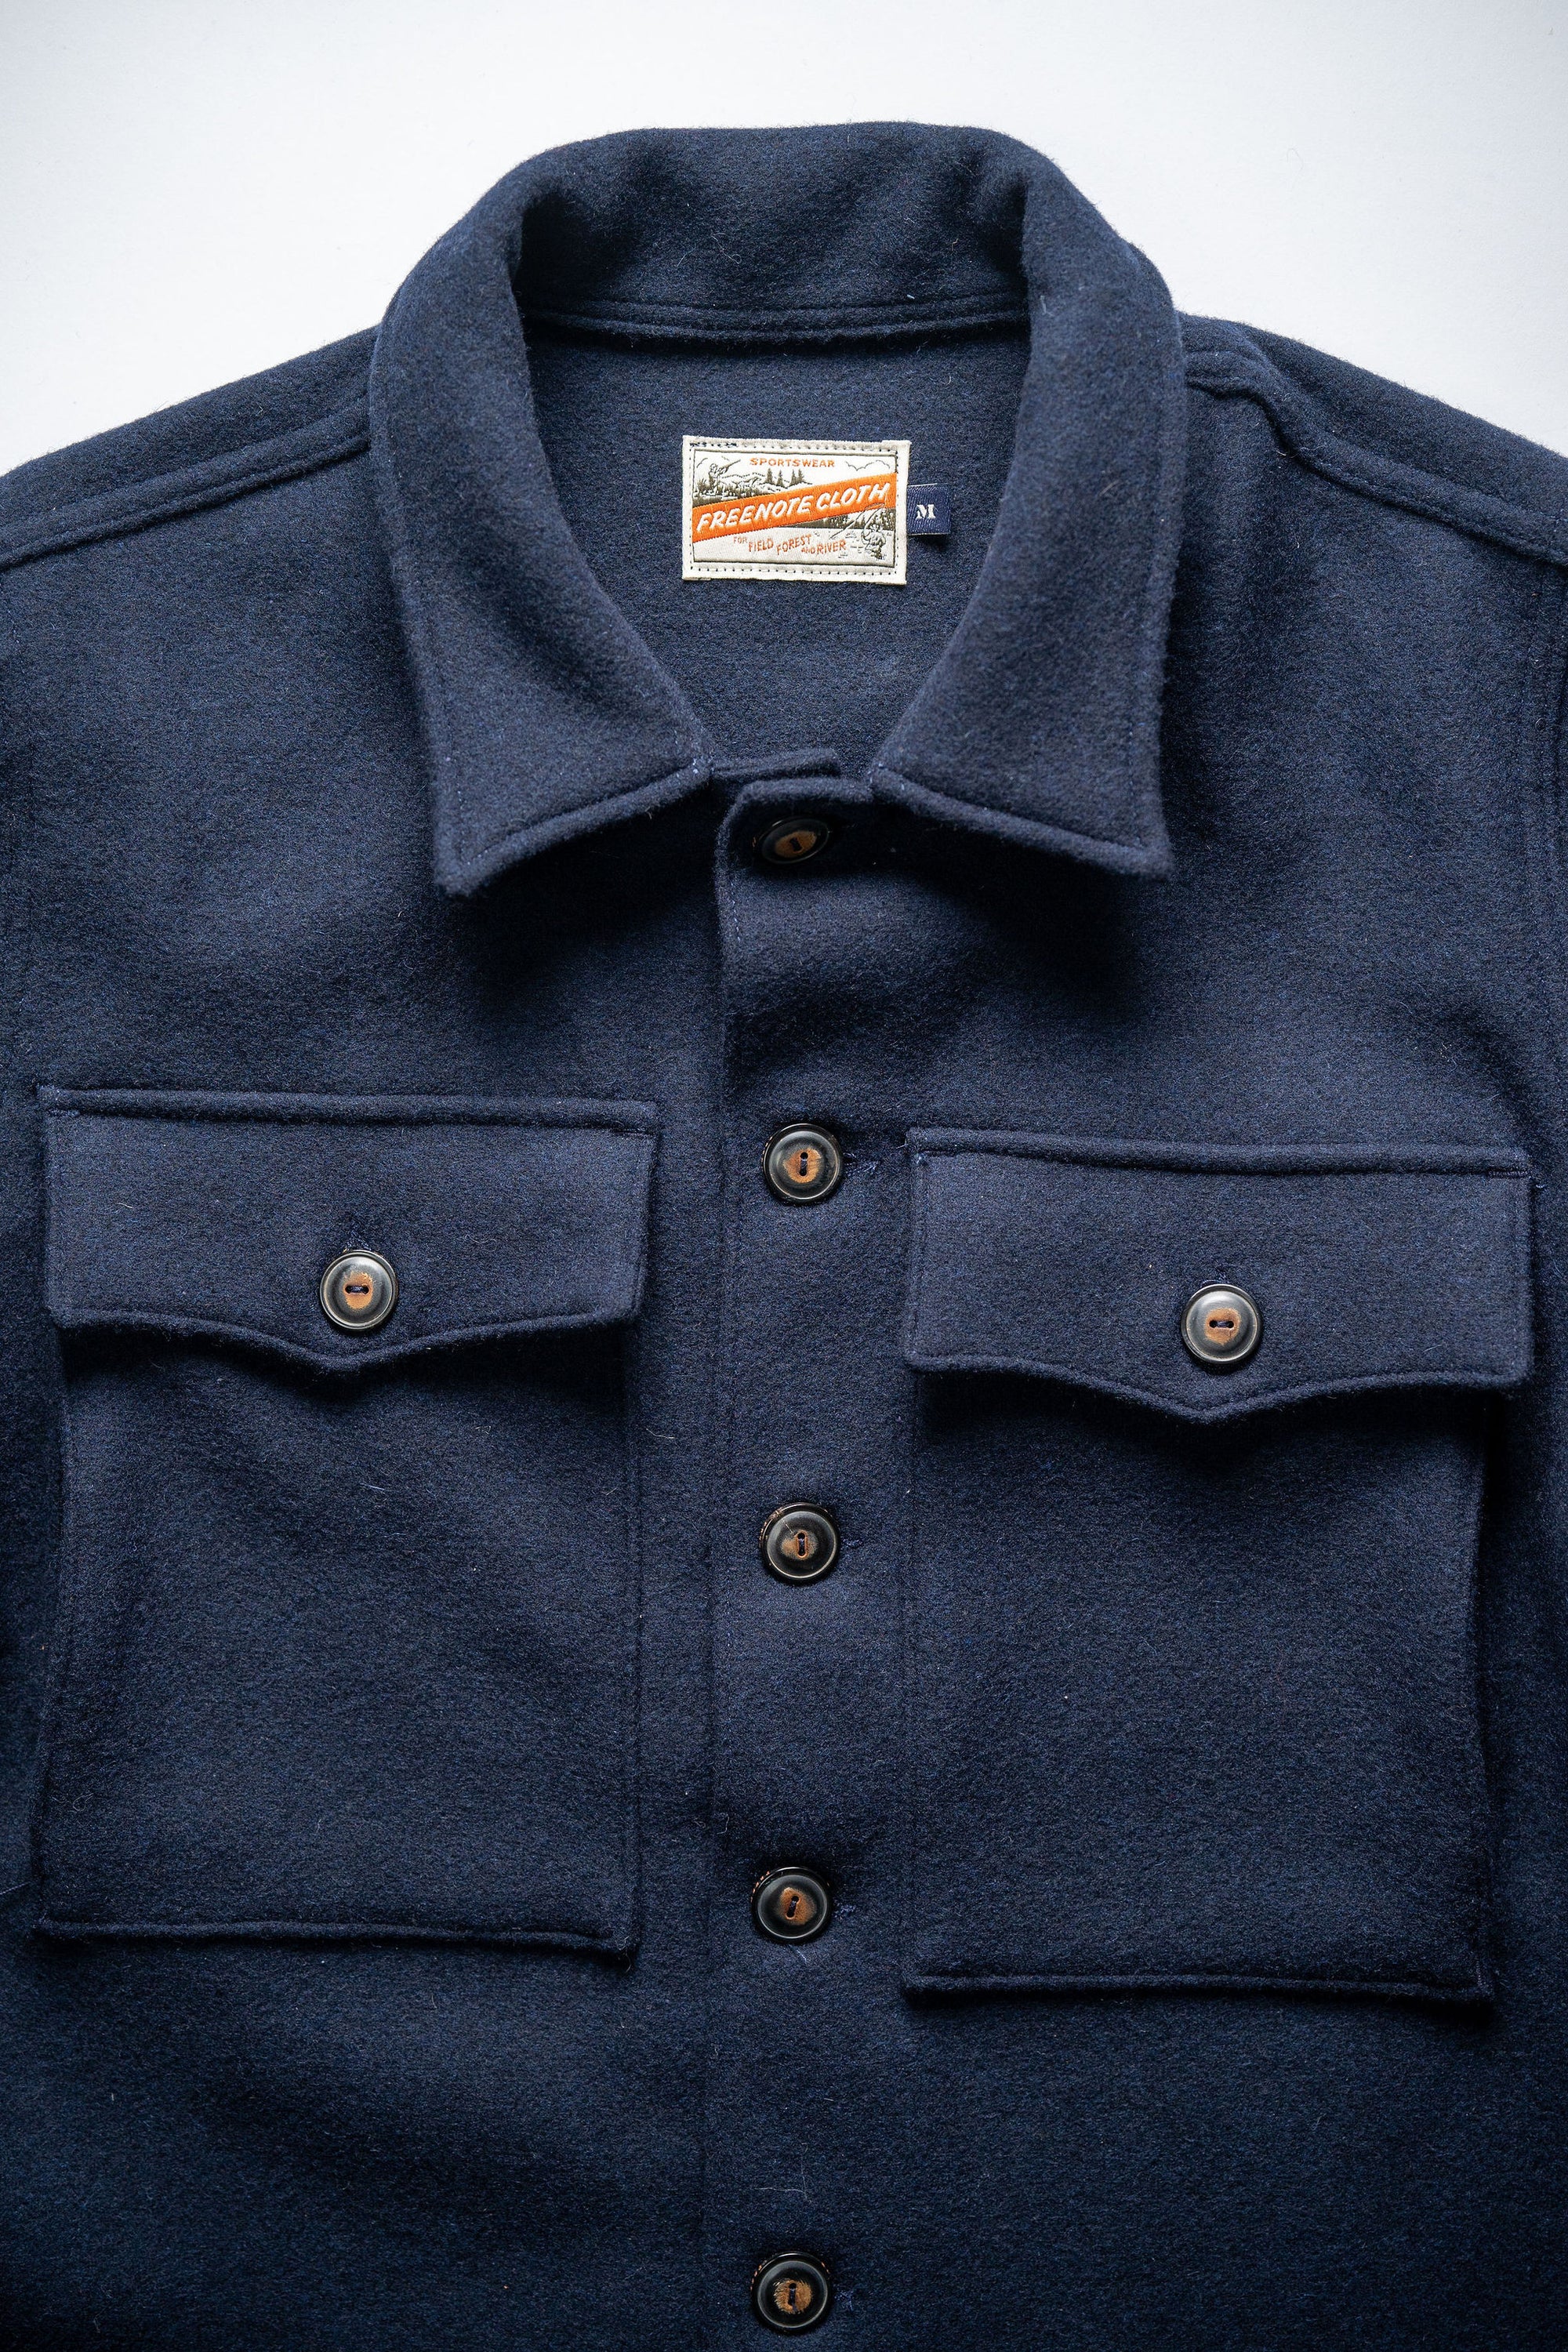 Freenote Cloth Midway Wool - Navy